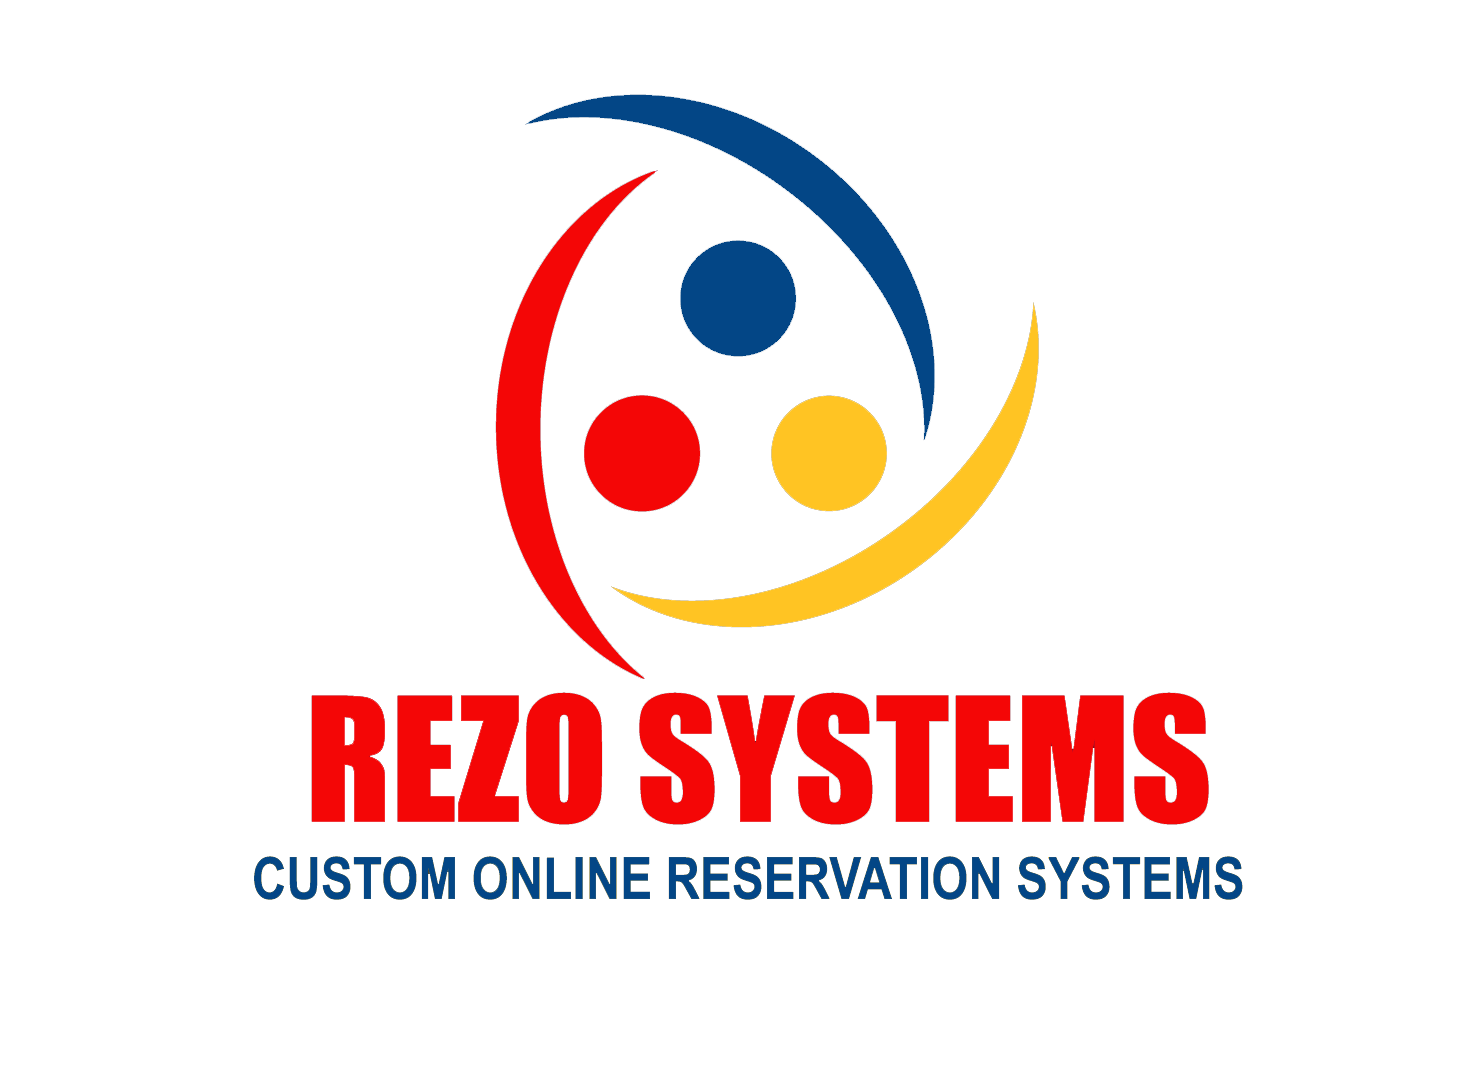 Rezo Systems - Custom Online Reservation Systems